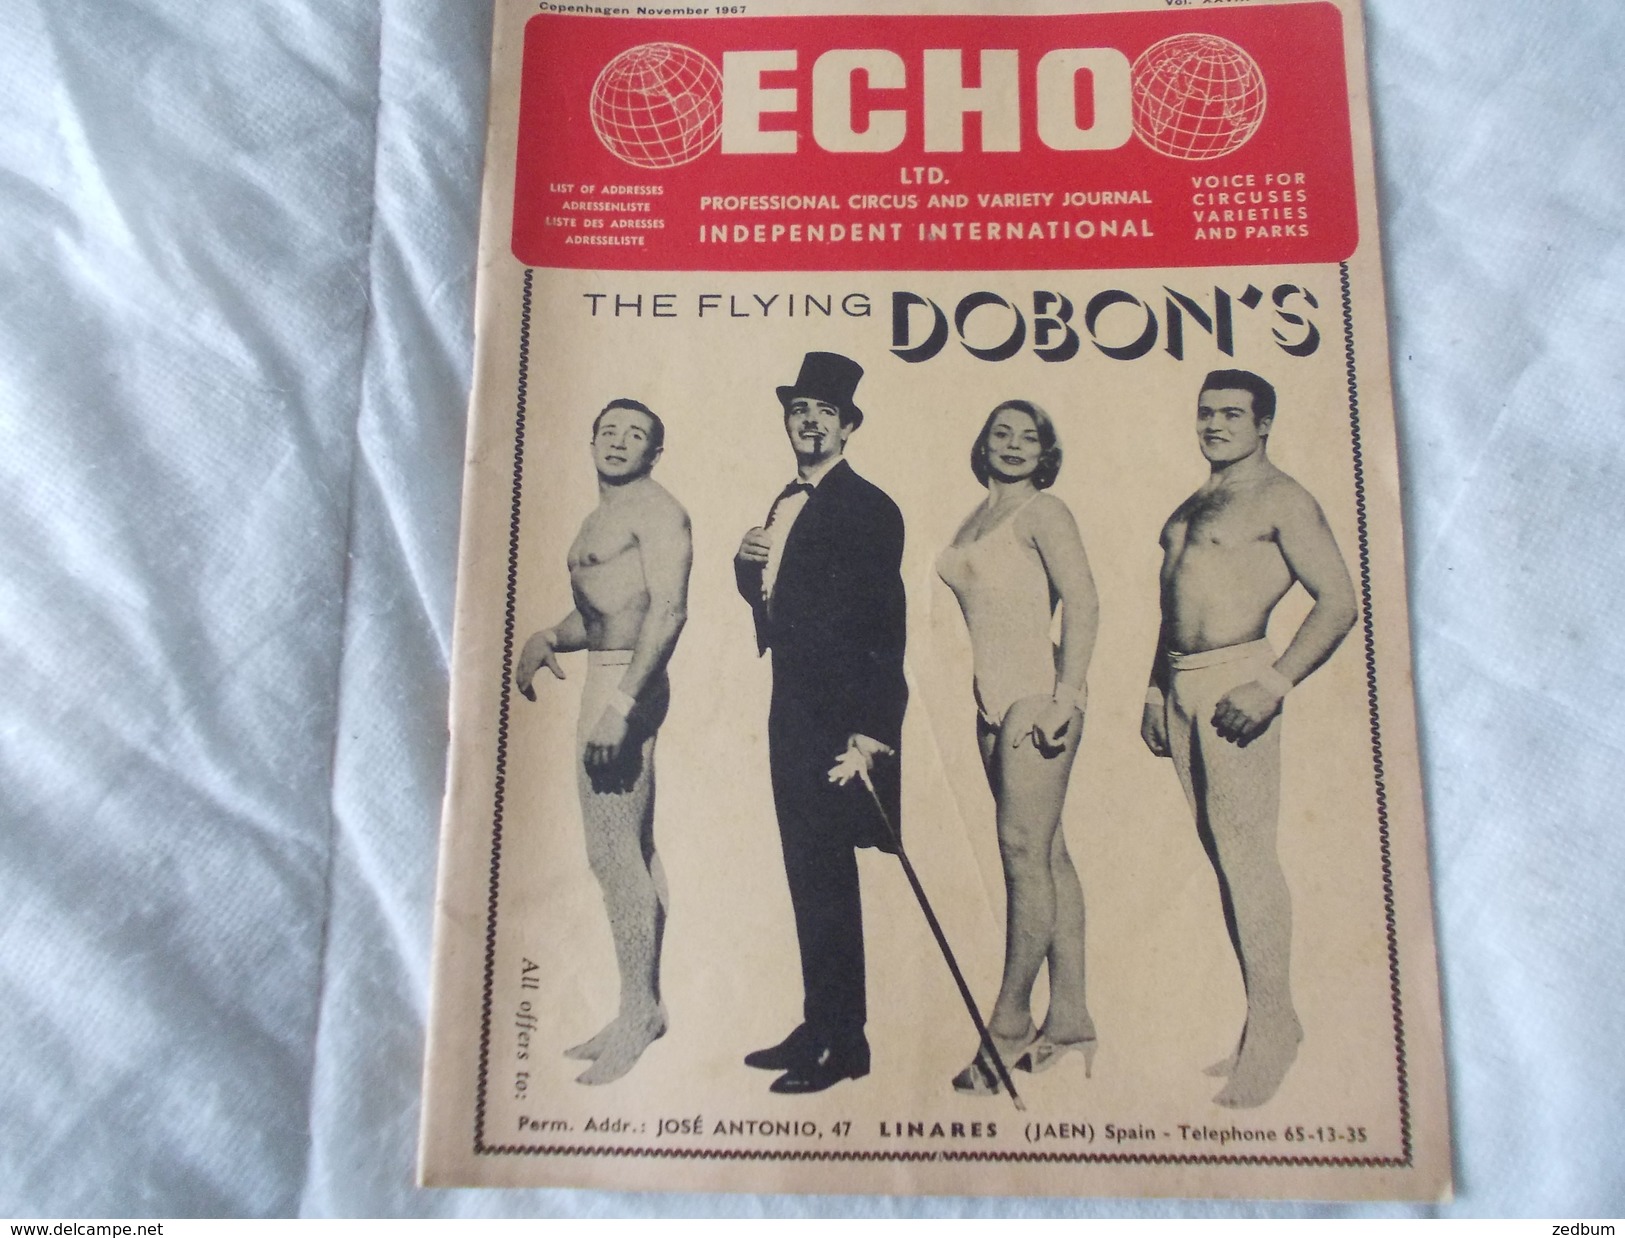 ECHO LTD Professional Circus And Variety Journal Independent International N° 309 November 1967 - Entretenimiento